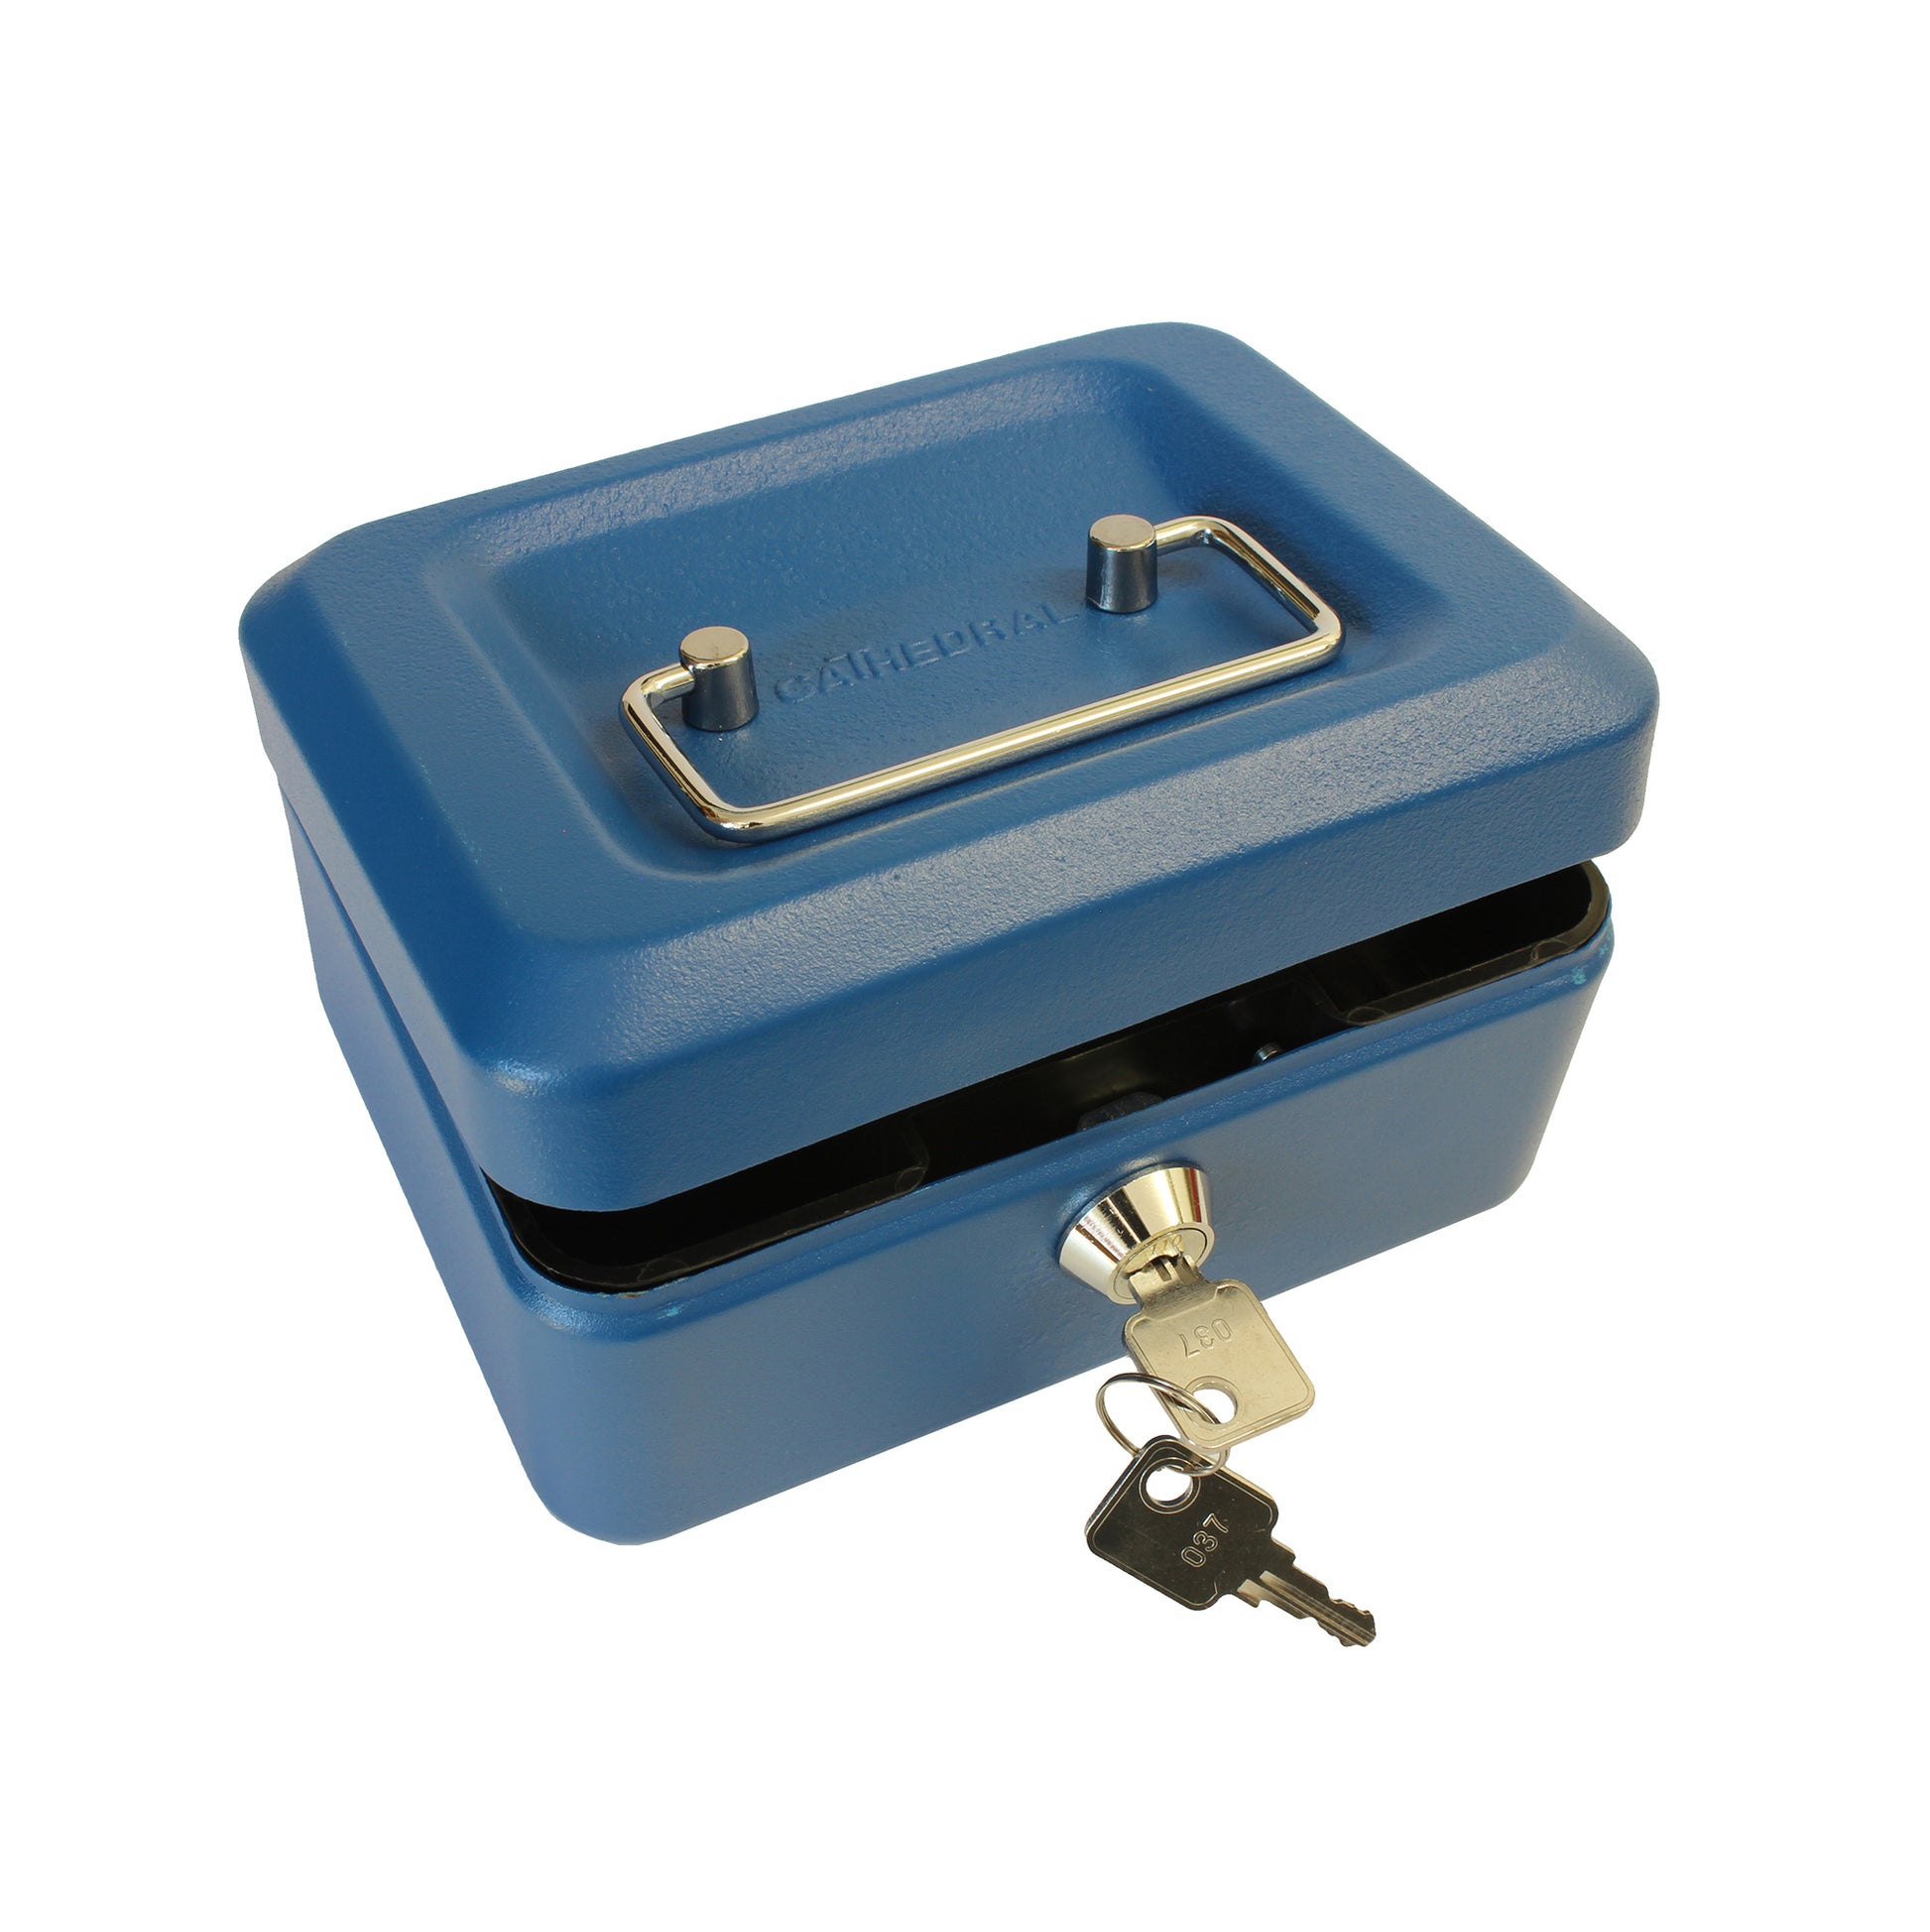 A partially open matte blue 6-inch key lockable cash box. The box features a sturdy metal handle and a secure lock at the front for safekeeping of cash and coins. A set of 2 keys on a ring is shown inserted into the lock on the front of the cash box.